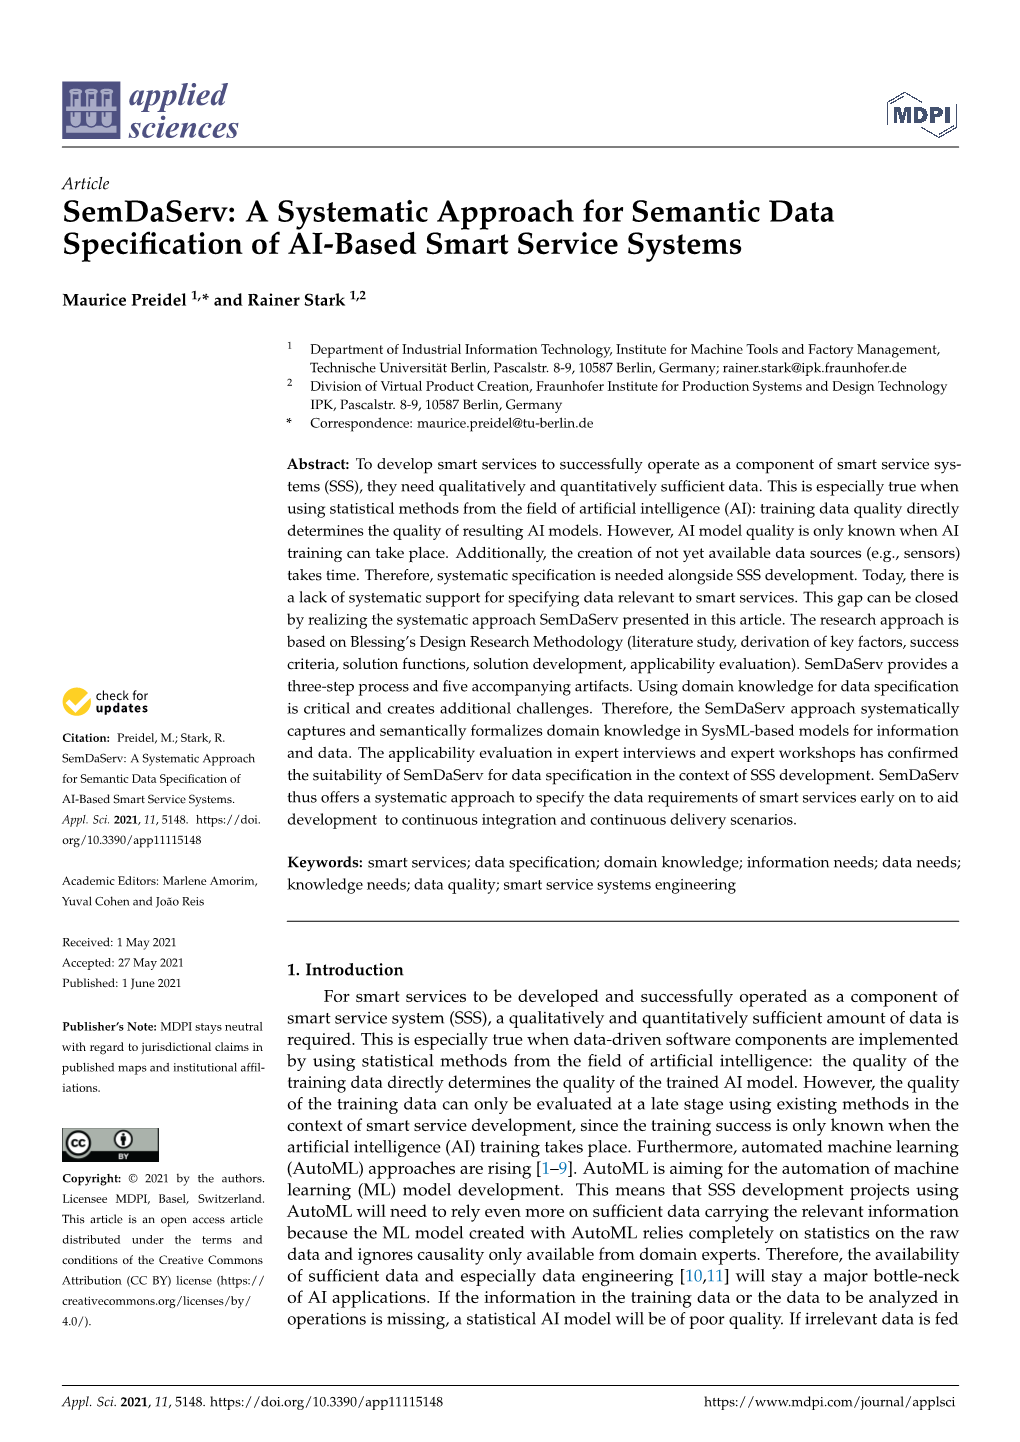 Semdaserv: a Systematic Approach for Semantic Data Specification Of